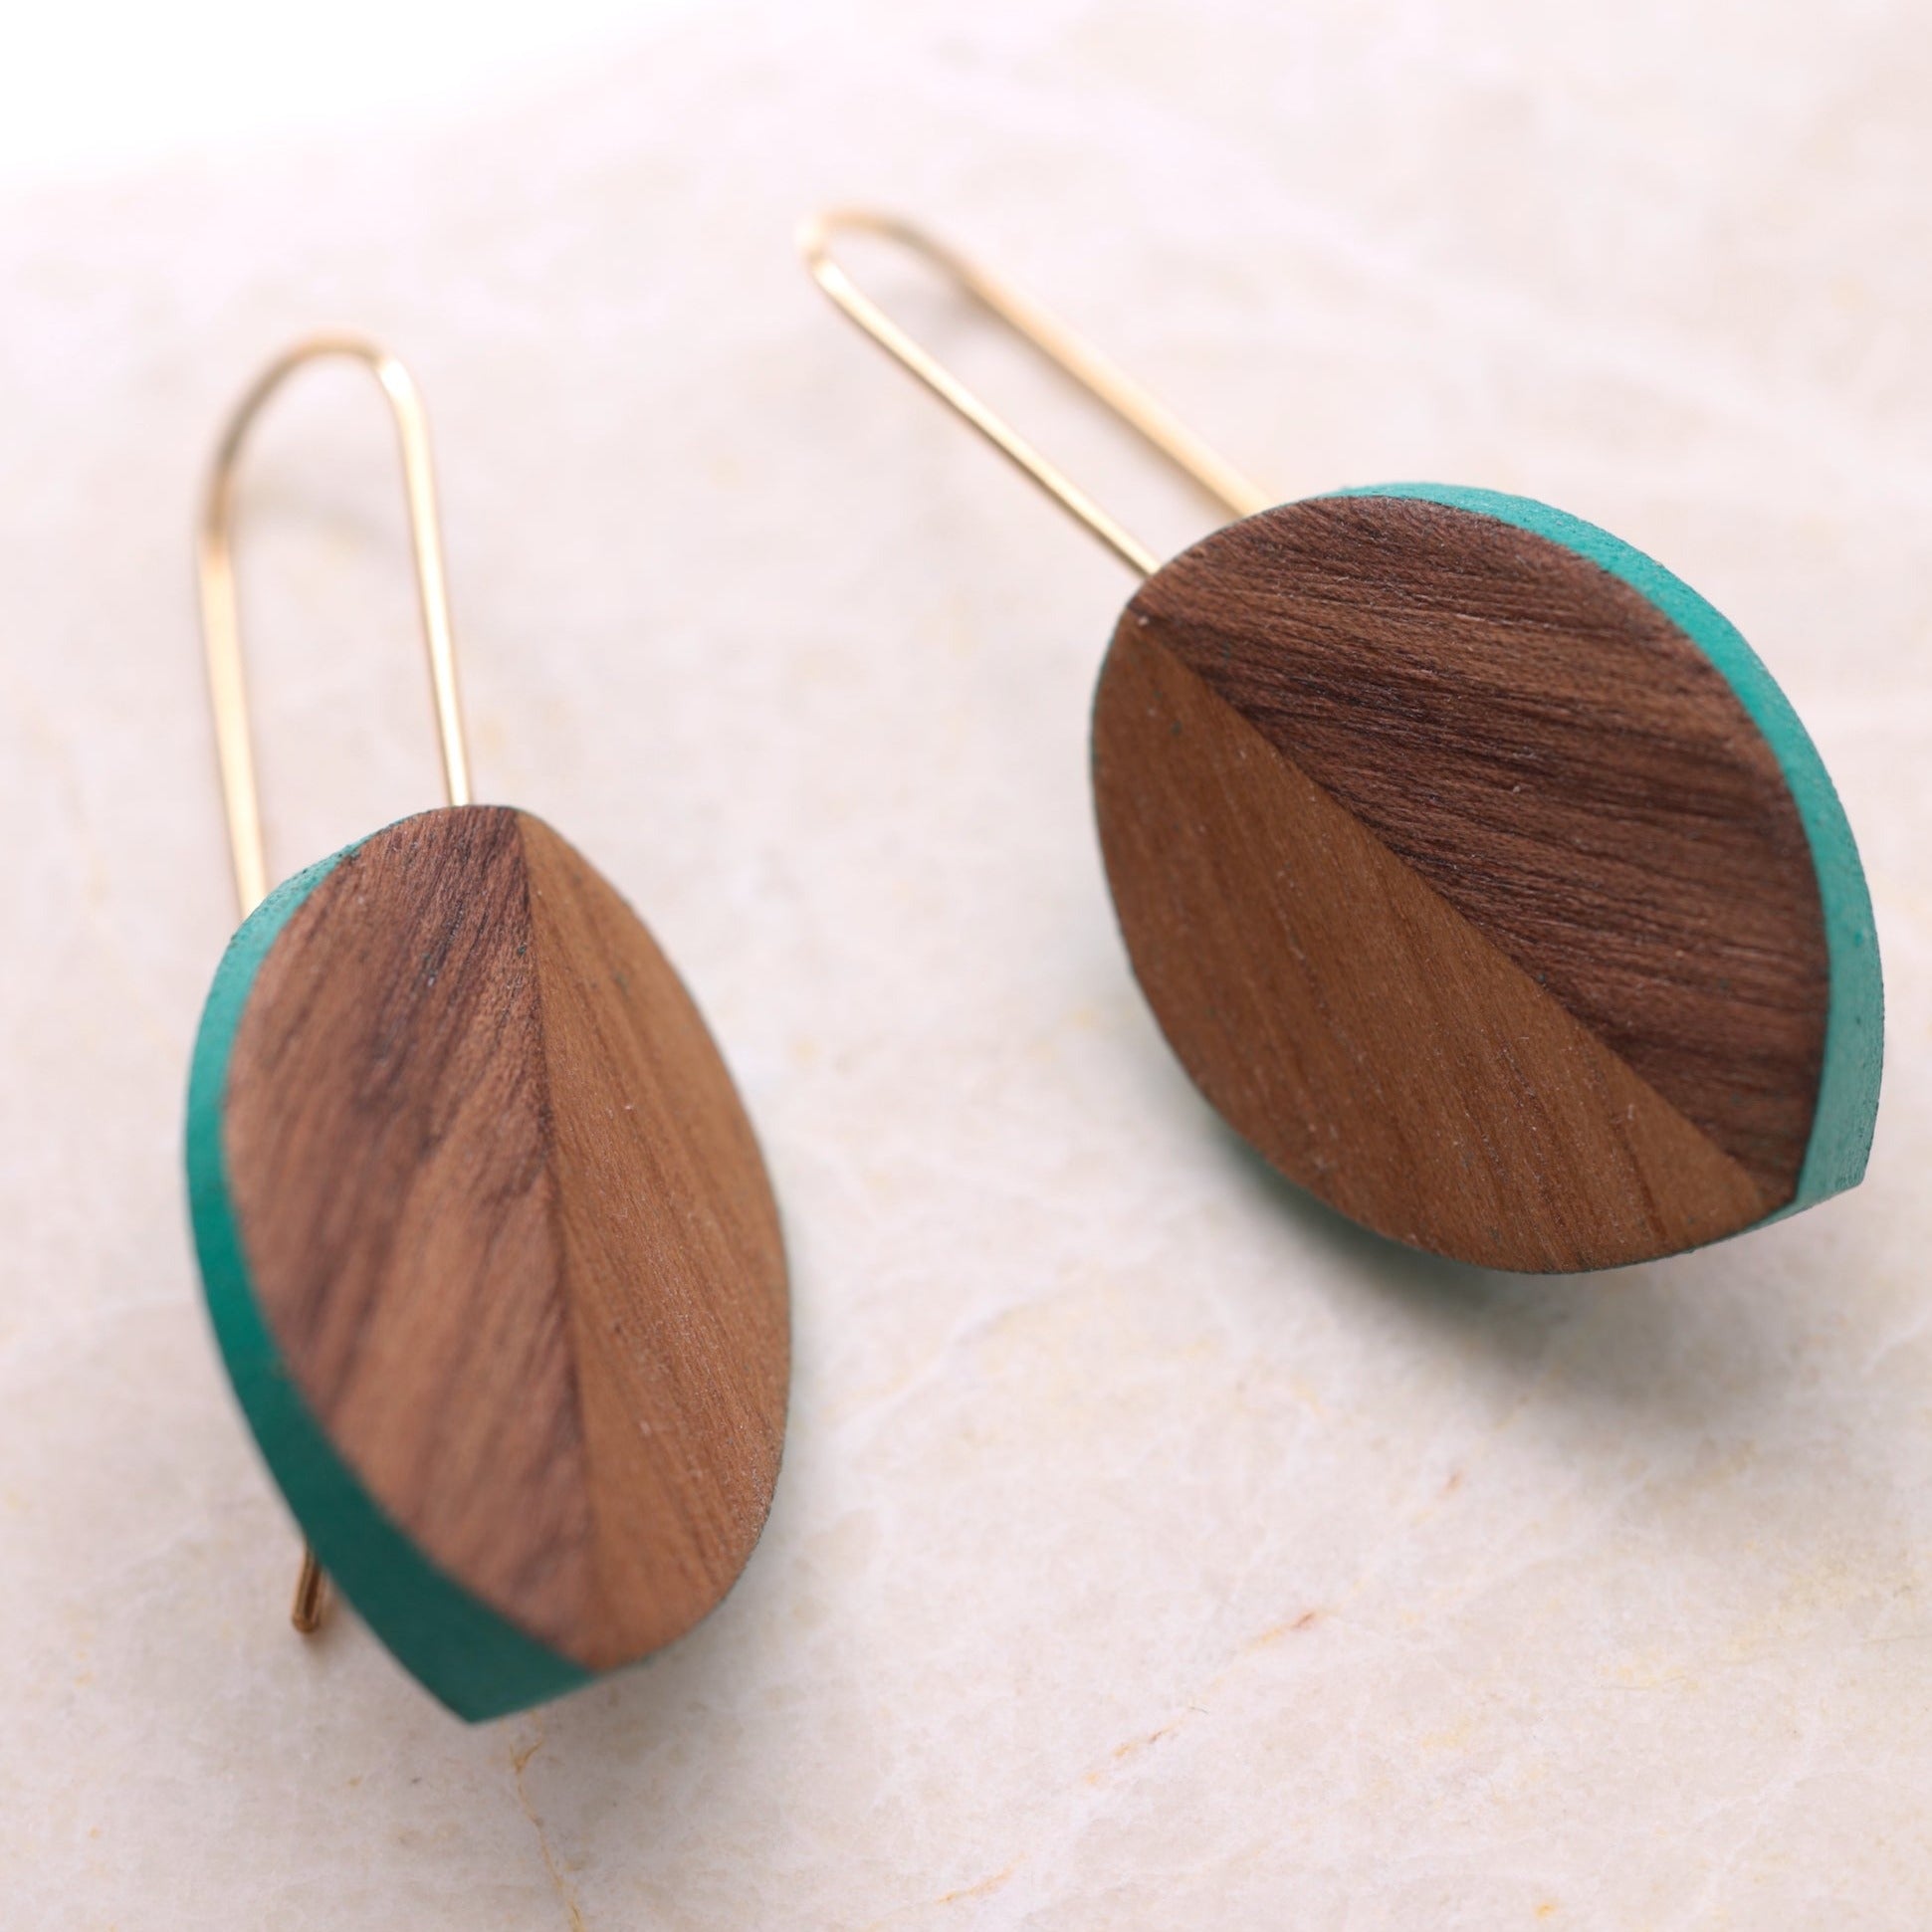 Leaf shaped wood carved earrings with turquoise accents, darker walnut wood.